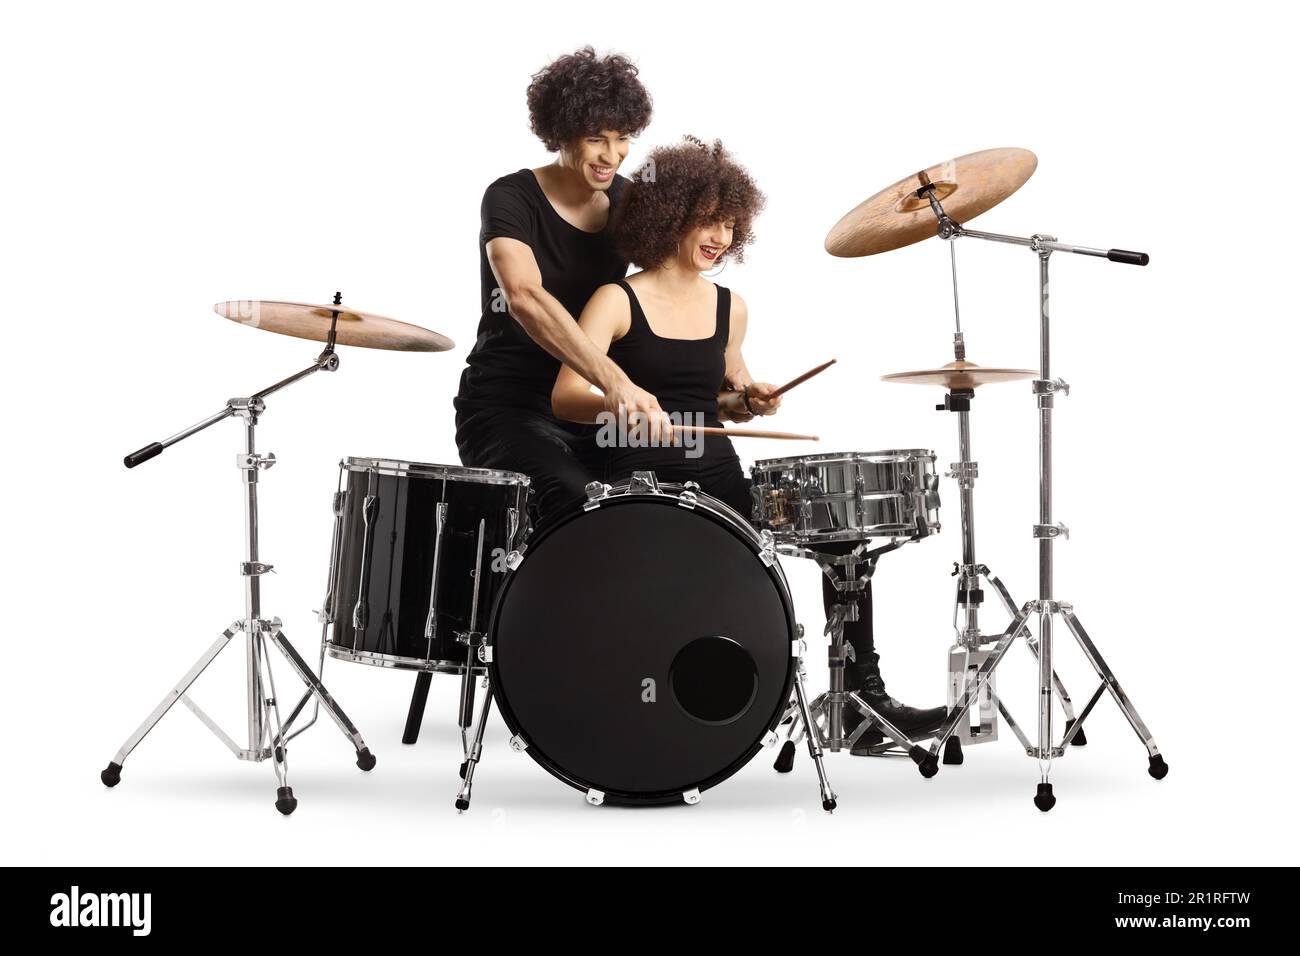 Young man teaching a woman to play drums isolated on white background Stock Photo